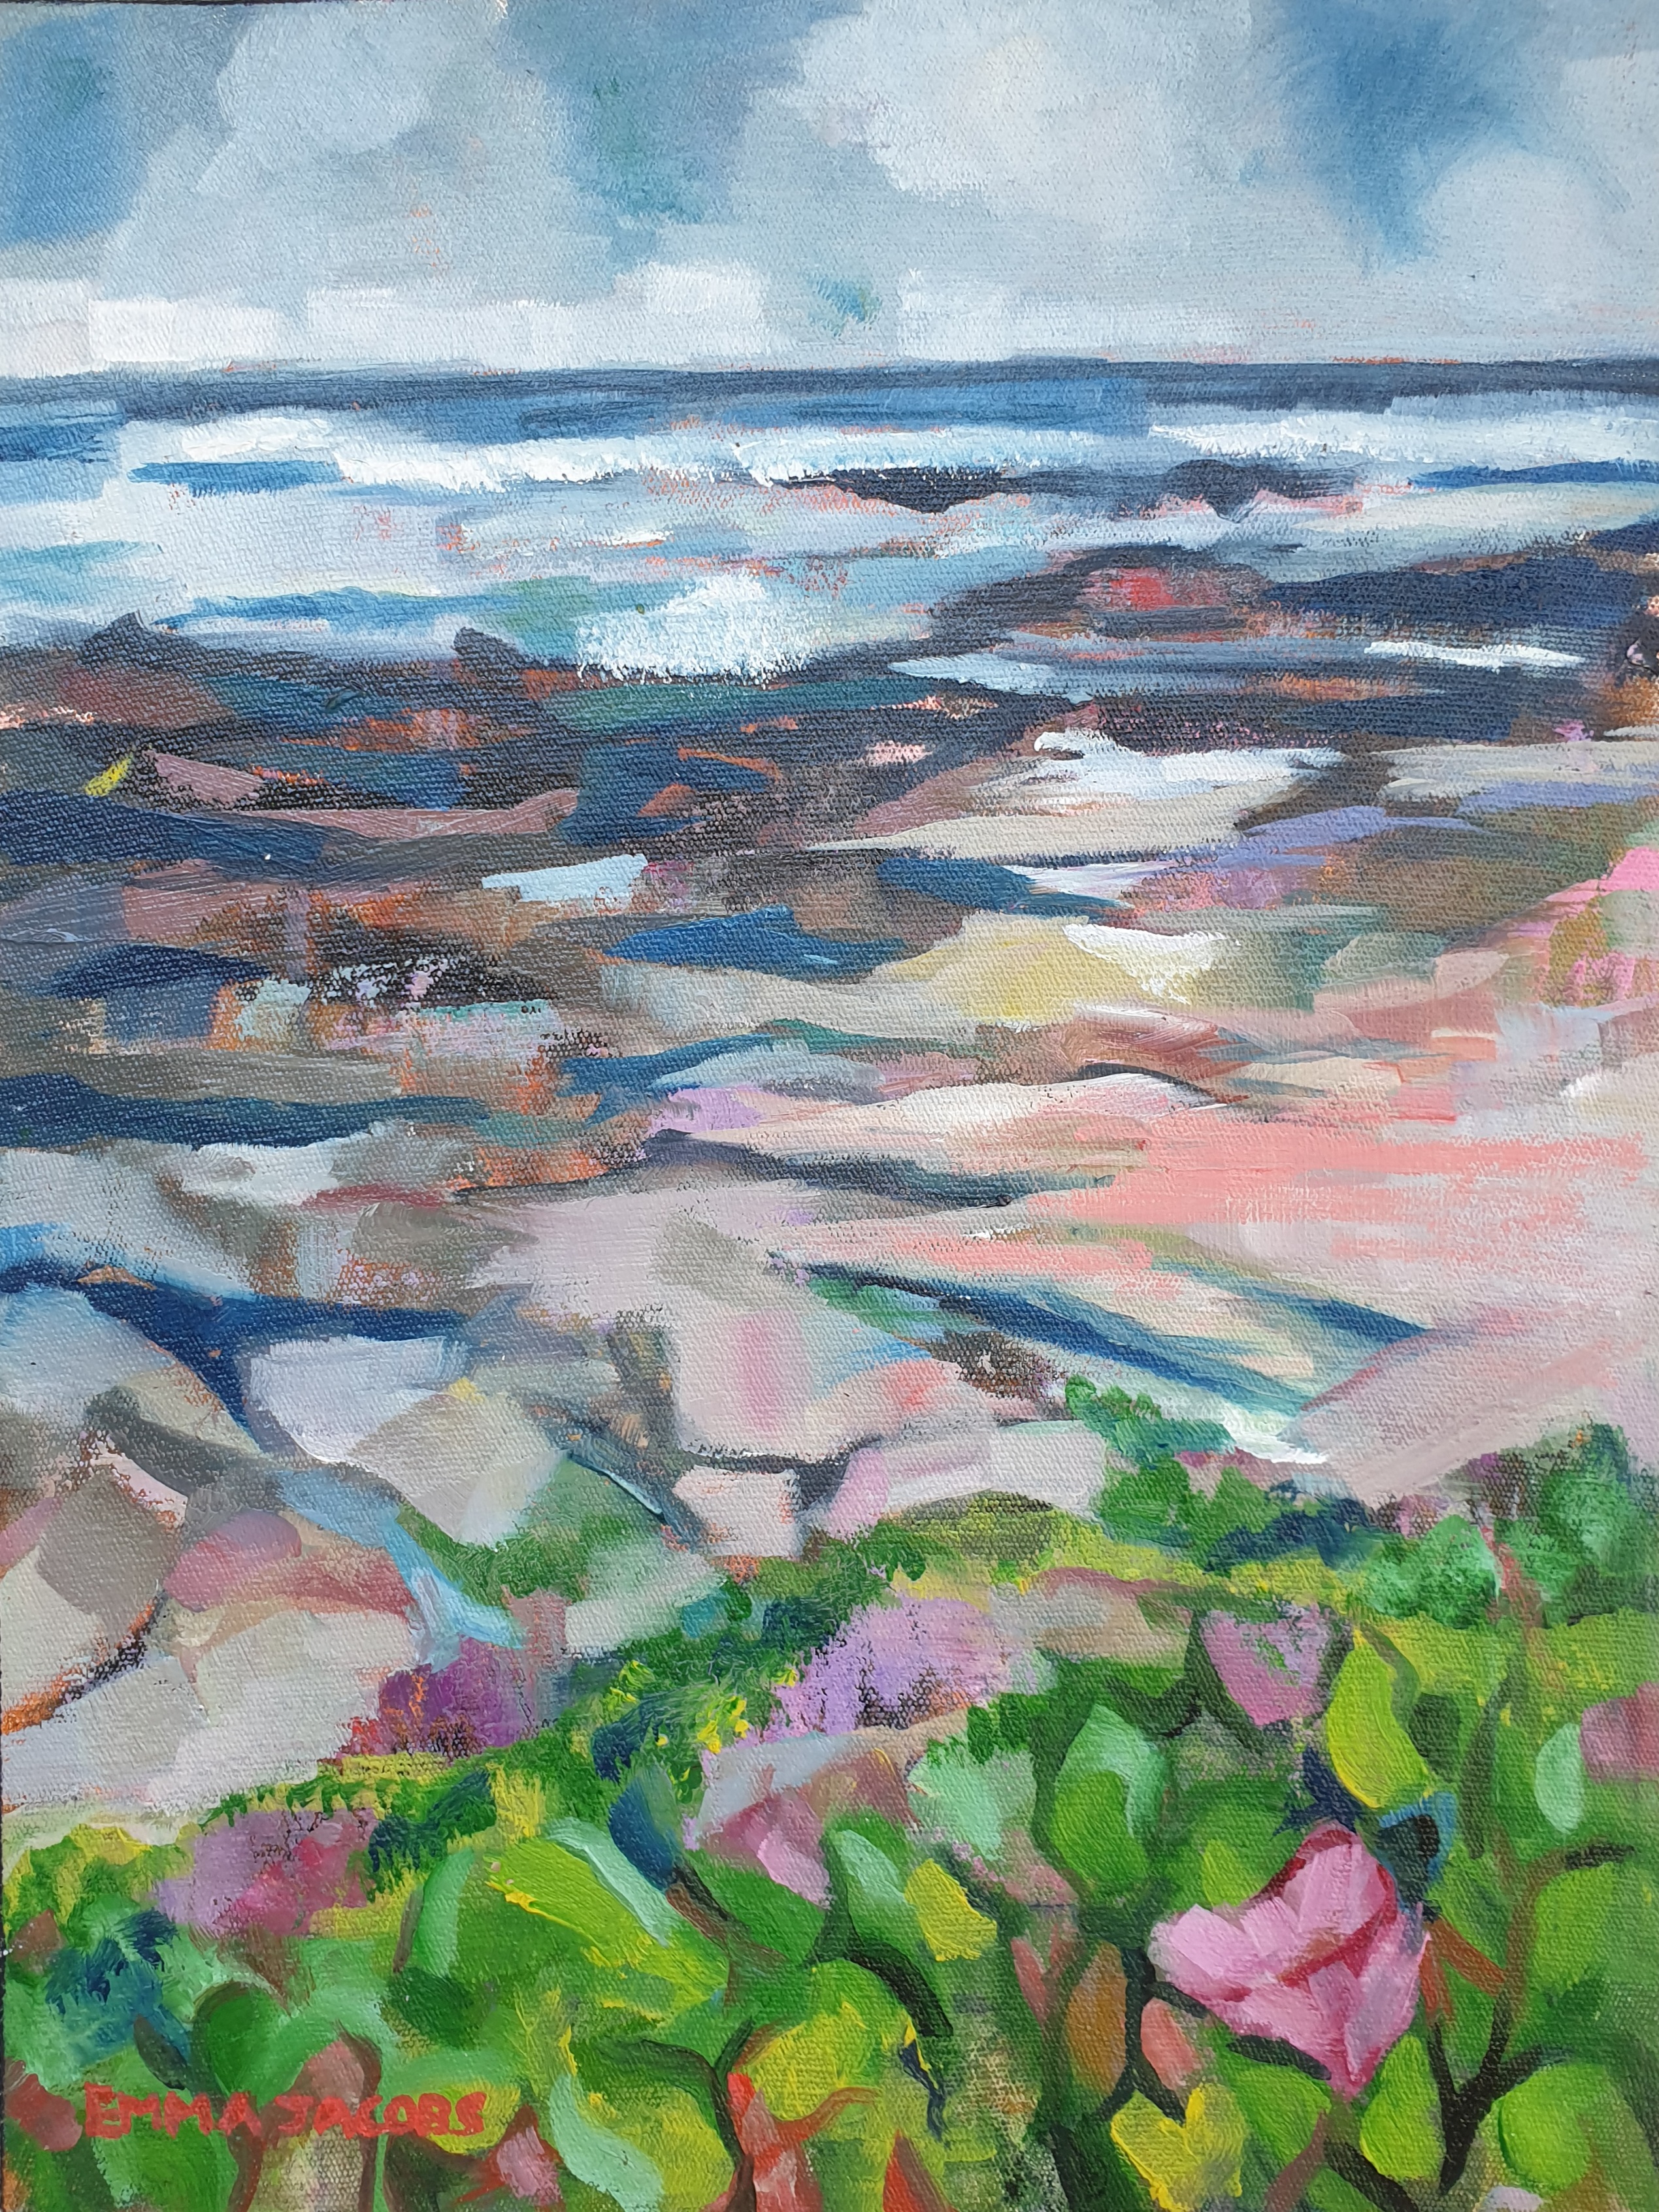 Contemporary oil ainting of Ballito beach with beach sand, foliage with pink flowers and rock outcrops